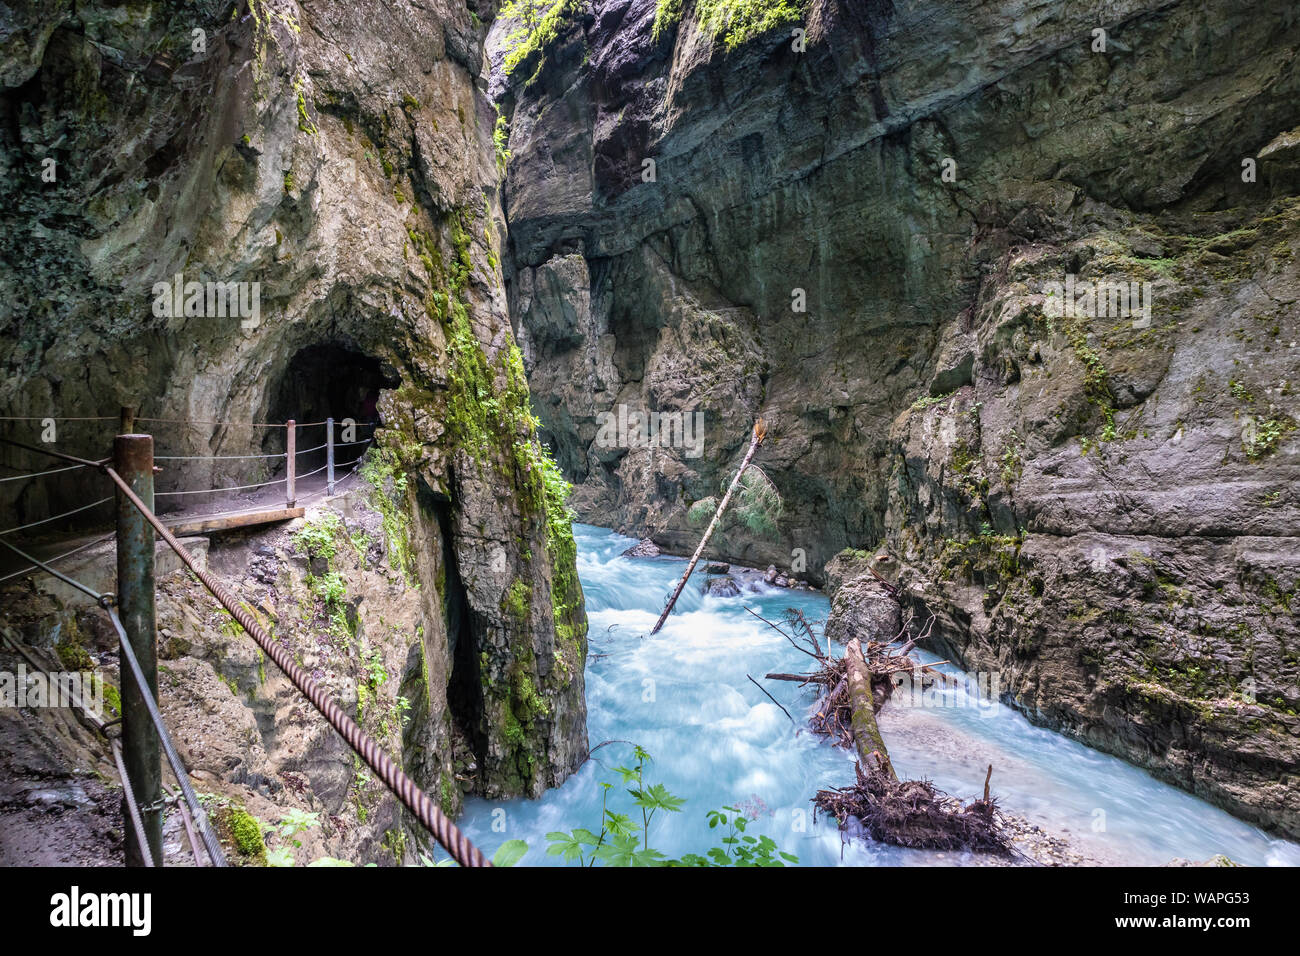 The fascinating touristic wildwater Partnach Gorge in Germany Stock Photo